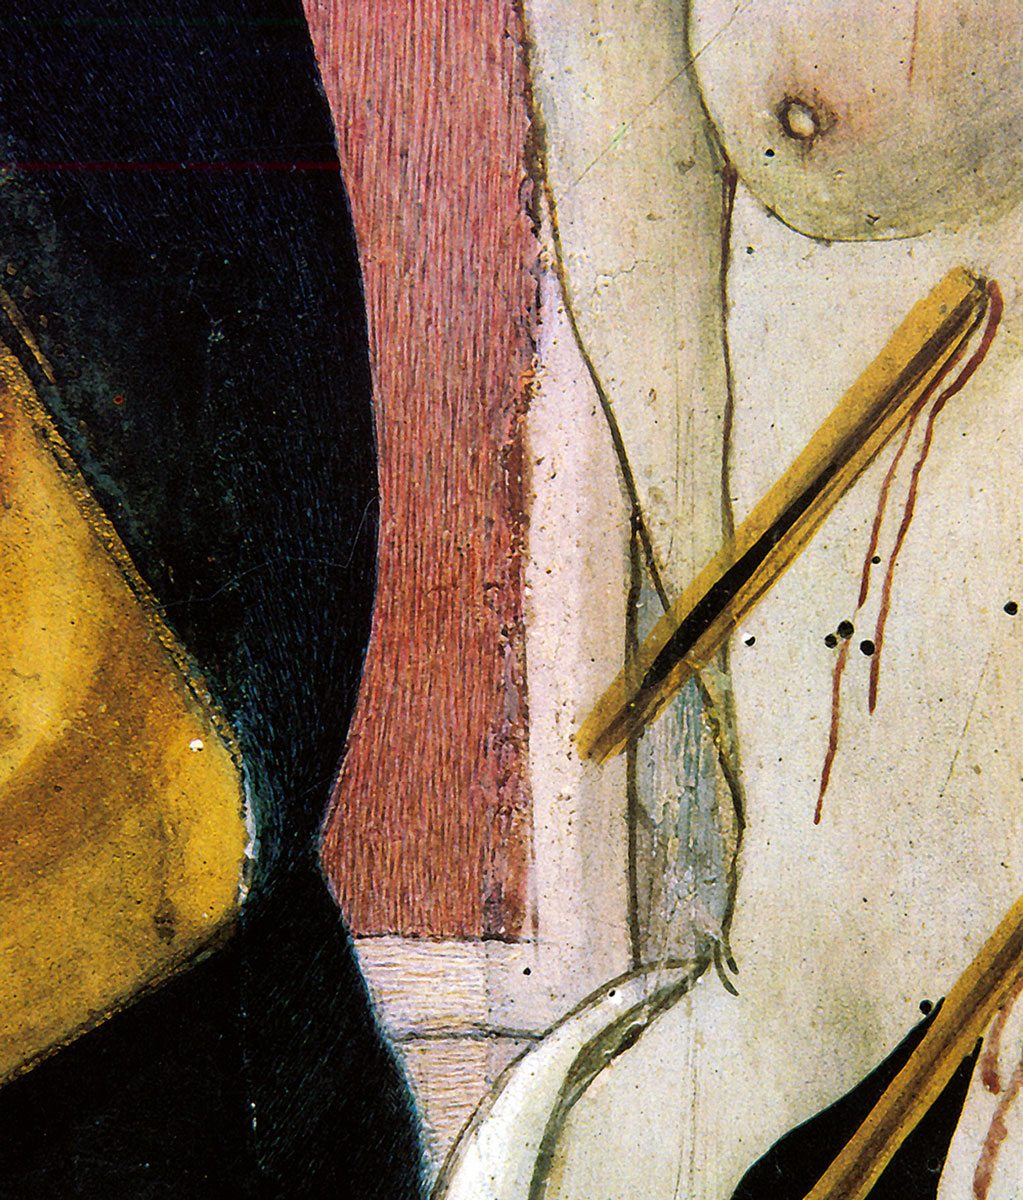 A detail of the restored fifteenth-century painting titled “Enthroned Madonna,” attributed to the Master of San Miniato, in the Pieve di San Bartolomeo at Pomino near Florence. The in-painted chromatic reflection reflects four distinct passes with four separate hues: the first yellow, the second orange-red, the third blue, and the last in tiny quantities of black to darken the overall effect.